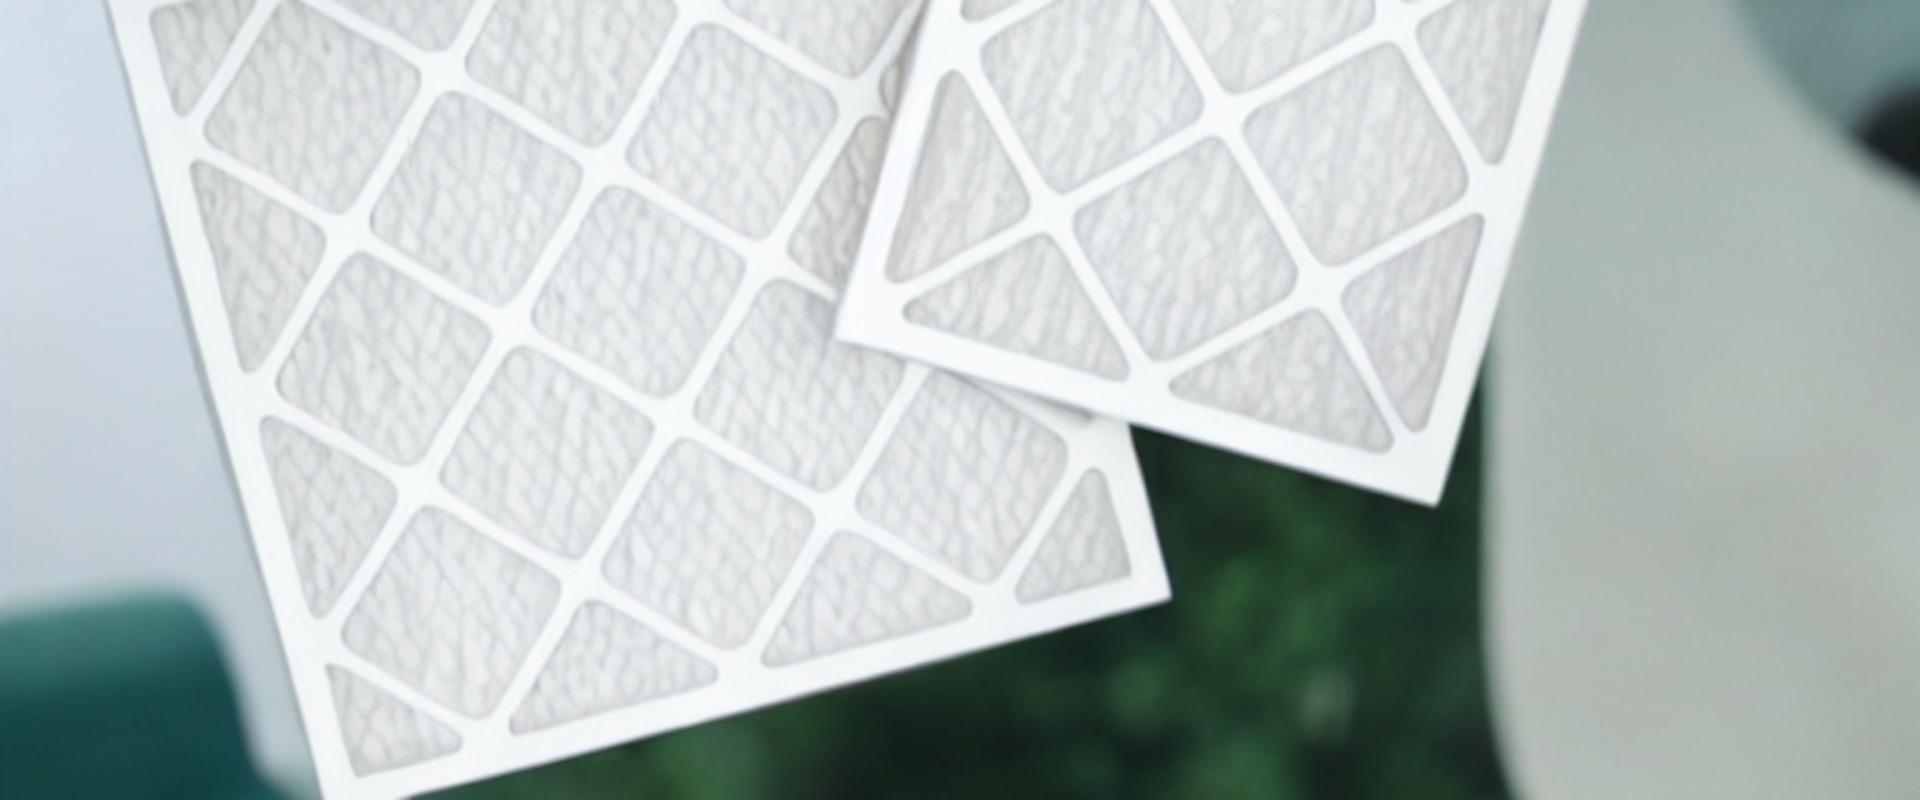 Optimize Indoor Air Quality With The Best HVAC Filter Subscription Service